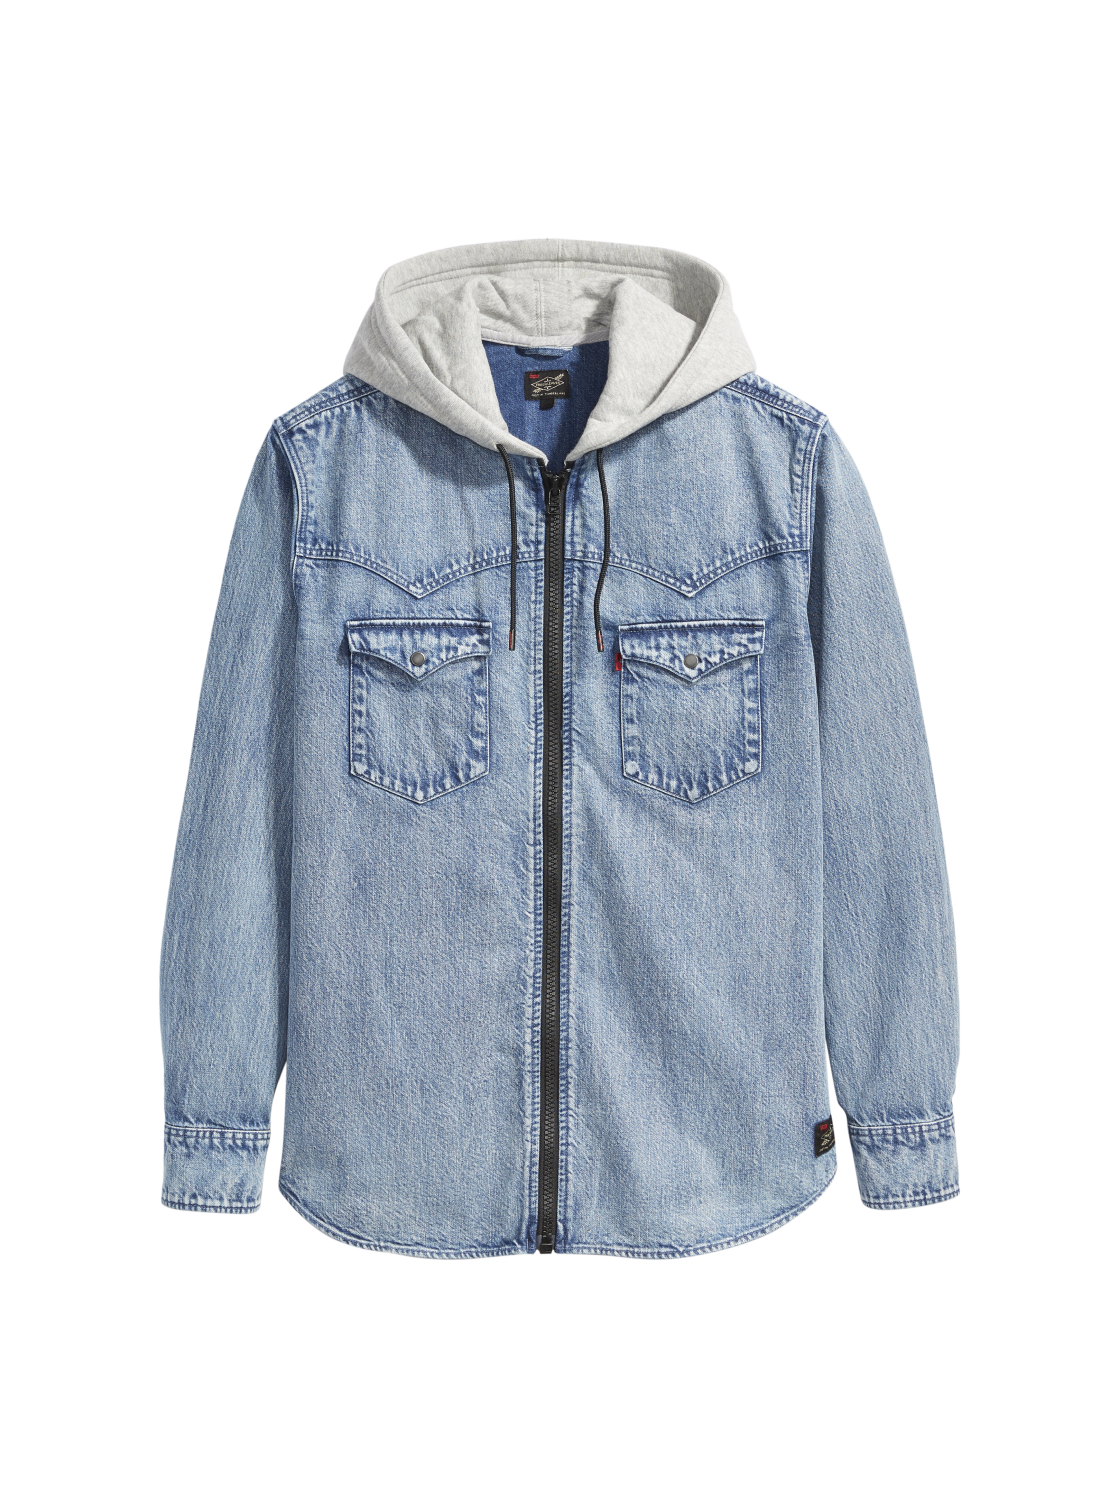 Levi's X Justin Timberlake Fresh Leaves Limited Edition Collection -  SWAGGER Magazine